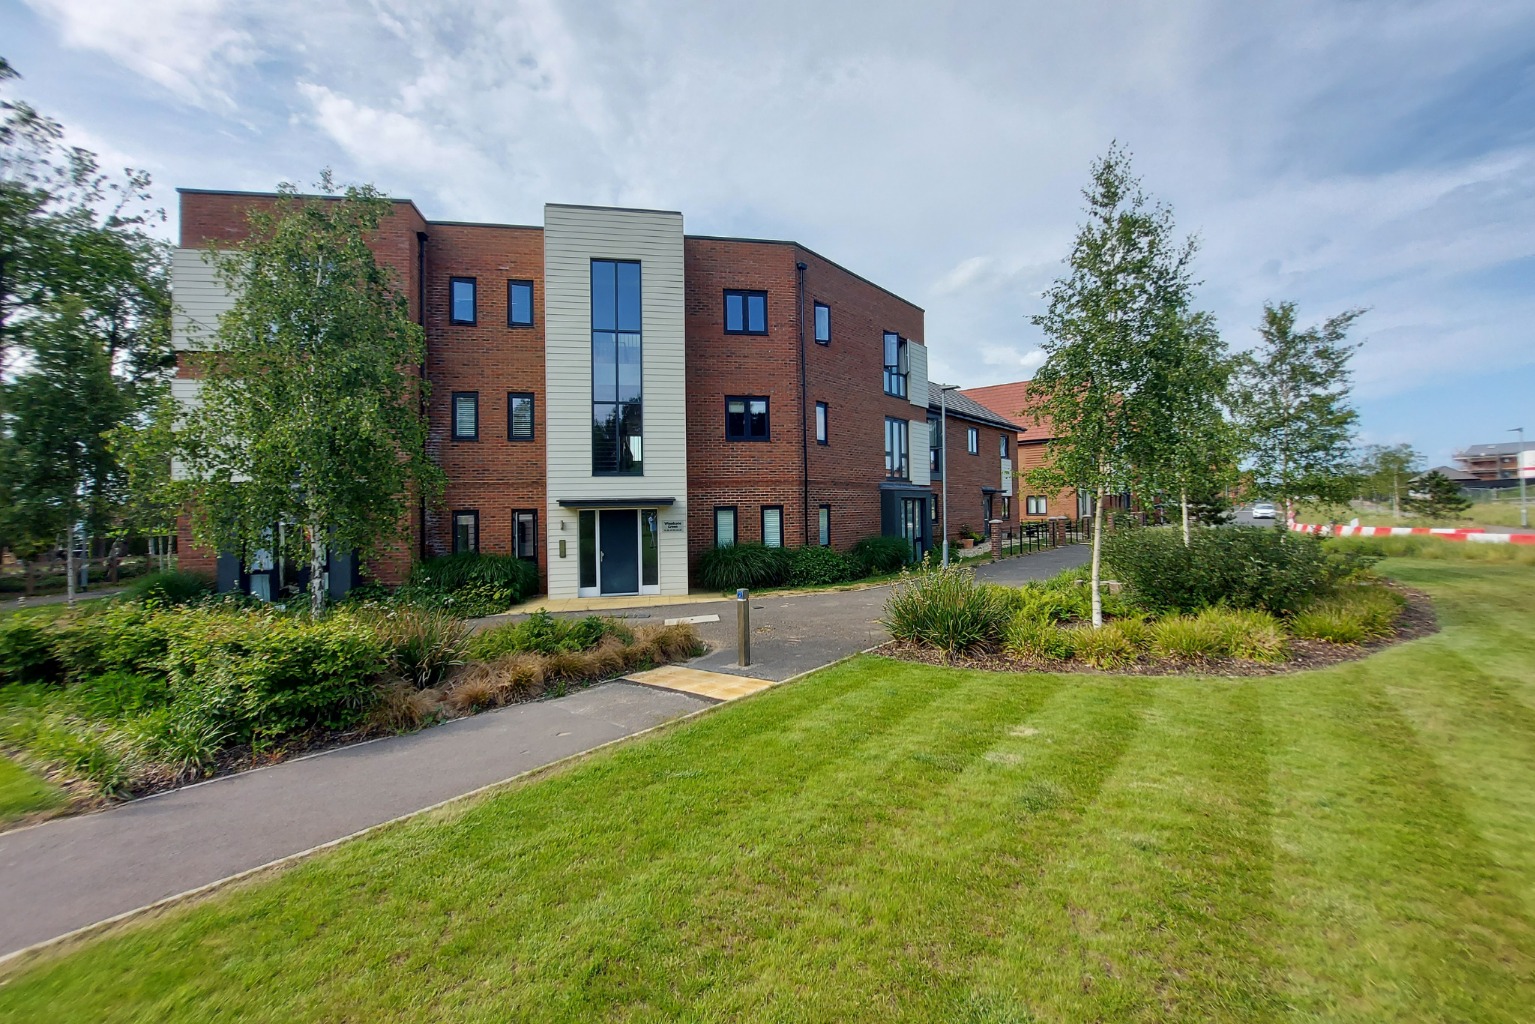 This Impressive high specification apartment with stunning views over Bucklers Forest has so much to offer, whilst being within walking distance of Crowthorne High Street.  Having been built in 2018 by Legal and General Homes, it really is in immaculate condition throughout with allocated parking .